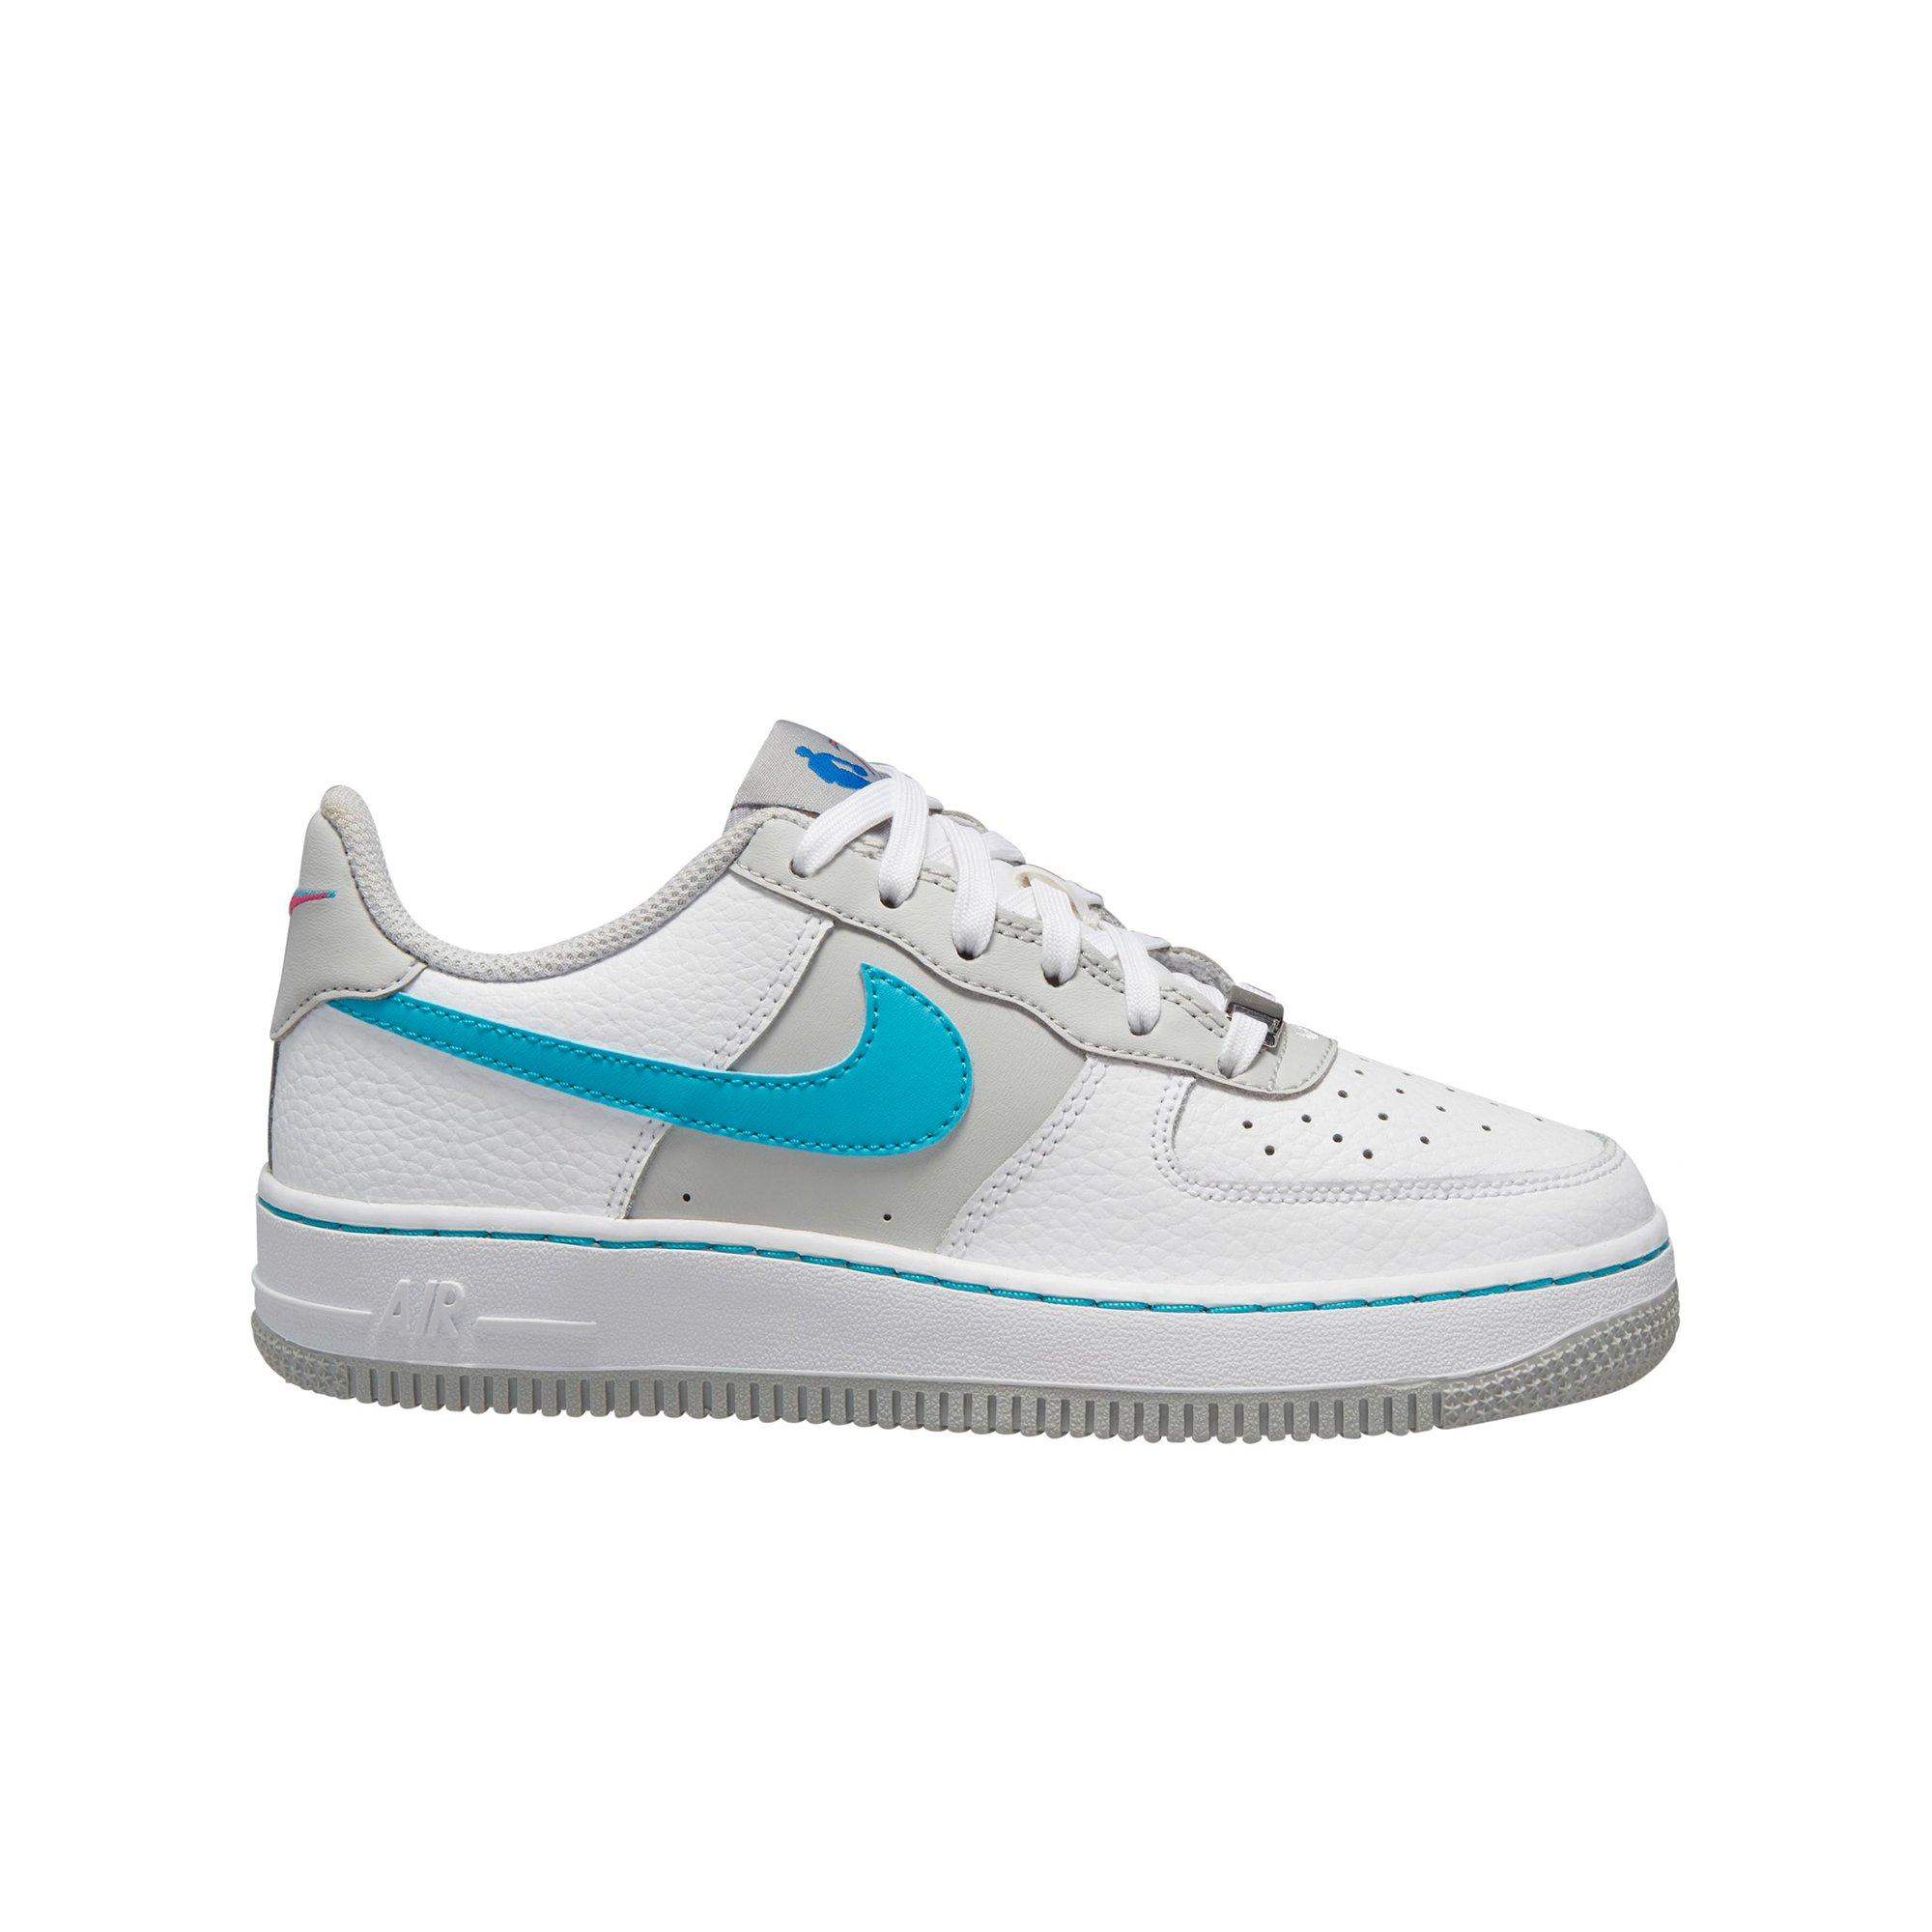 Nike Air Force 1 AF1 LV8 Baby Toddler Sneakers Shoes Leather FJ4811 5C 5  NEW